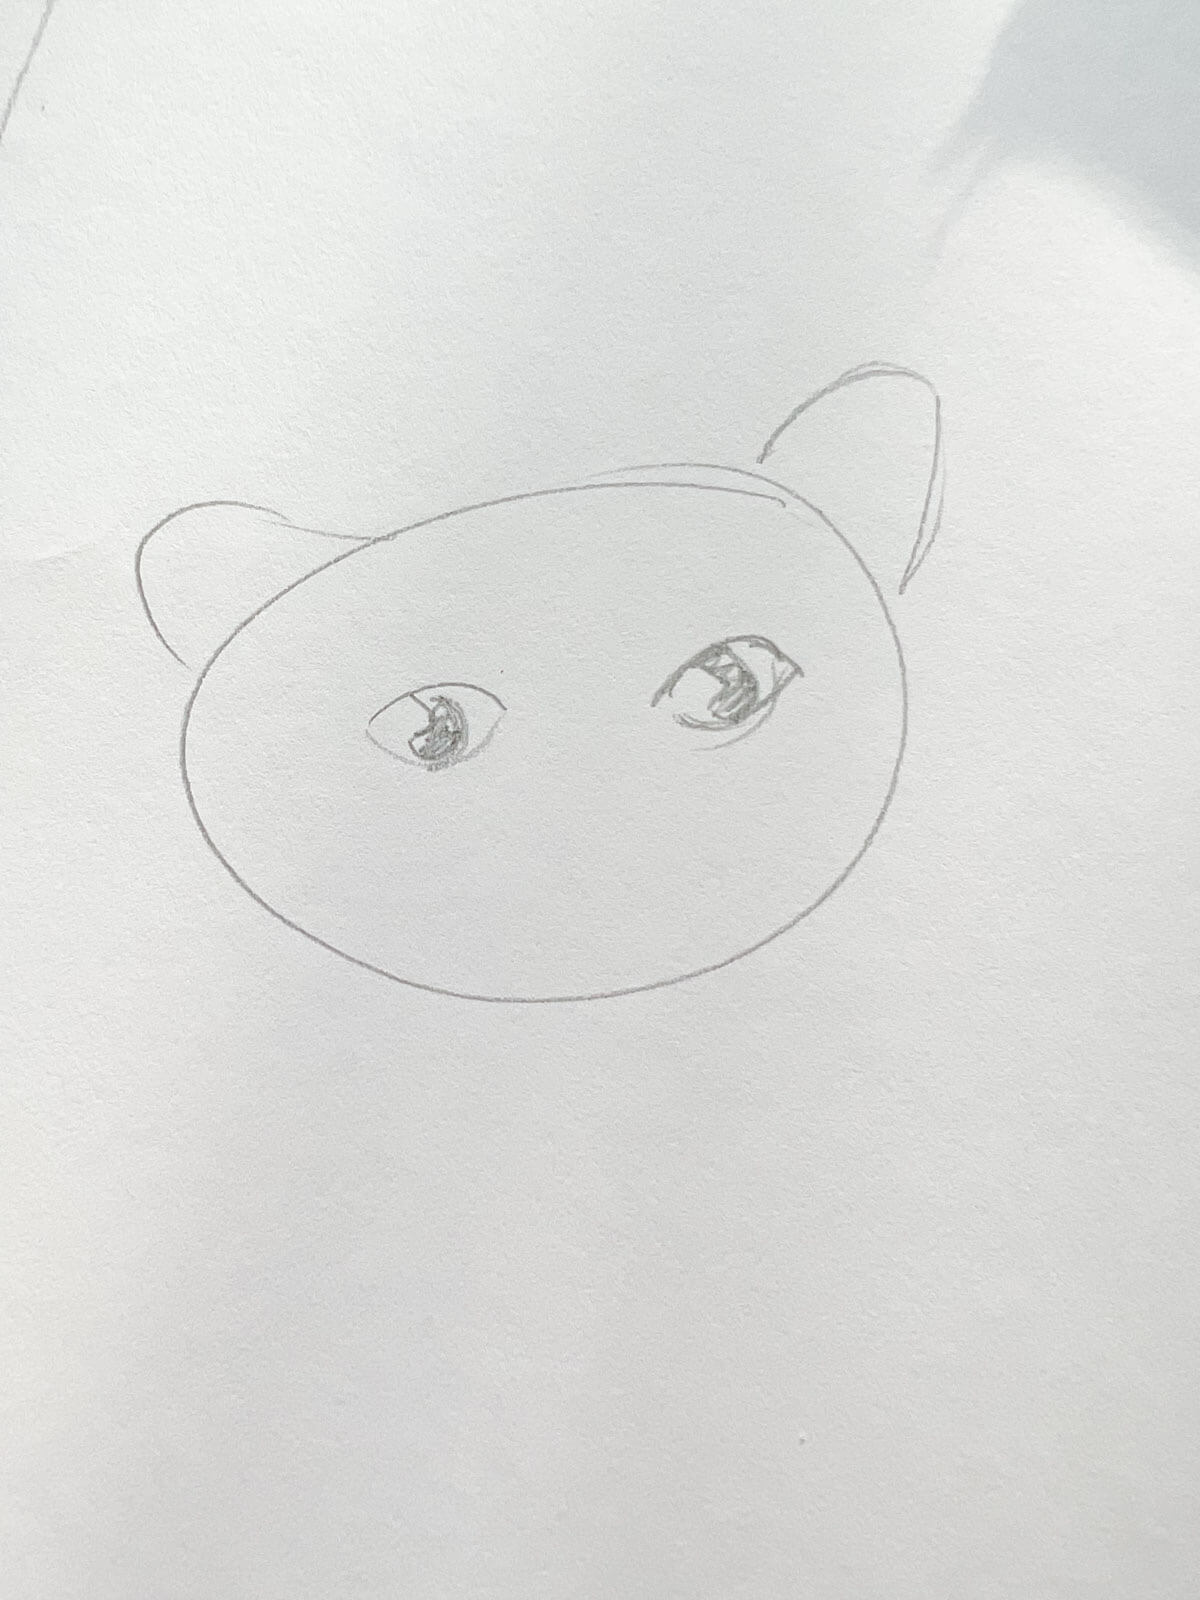 cat ears and eyes sketched into oval on white paper.